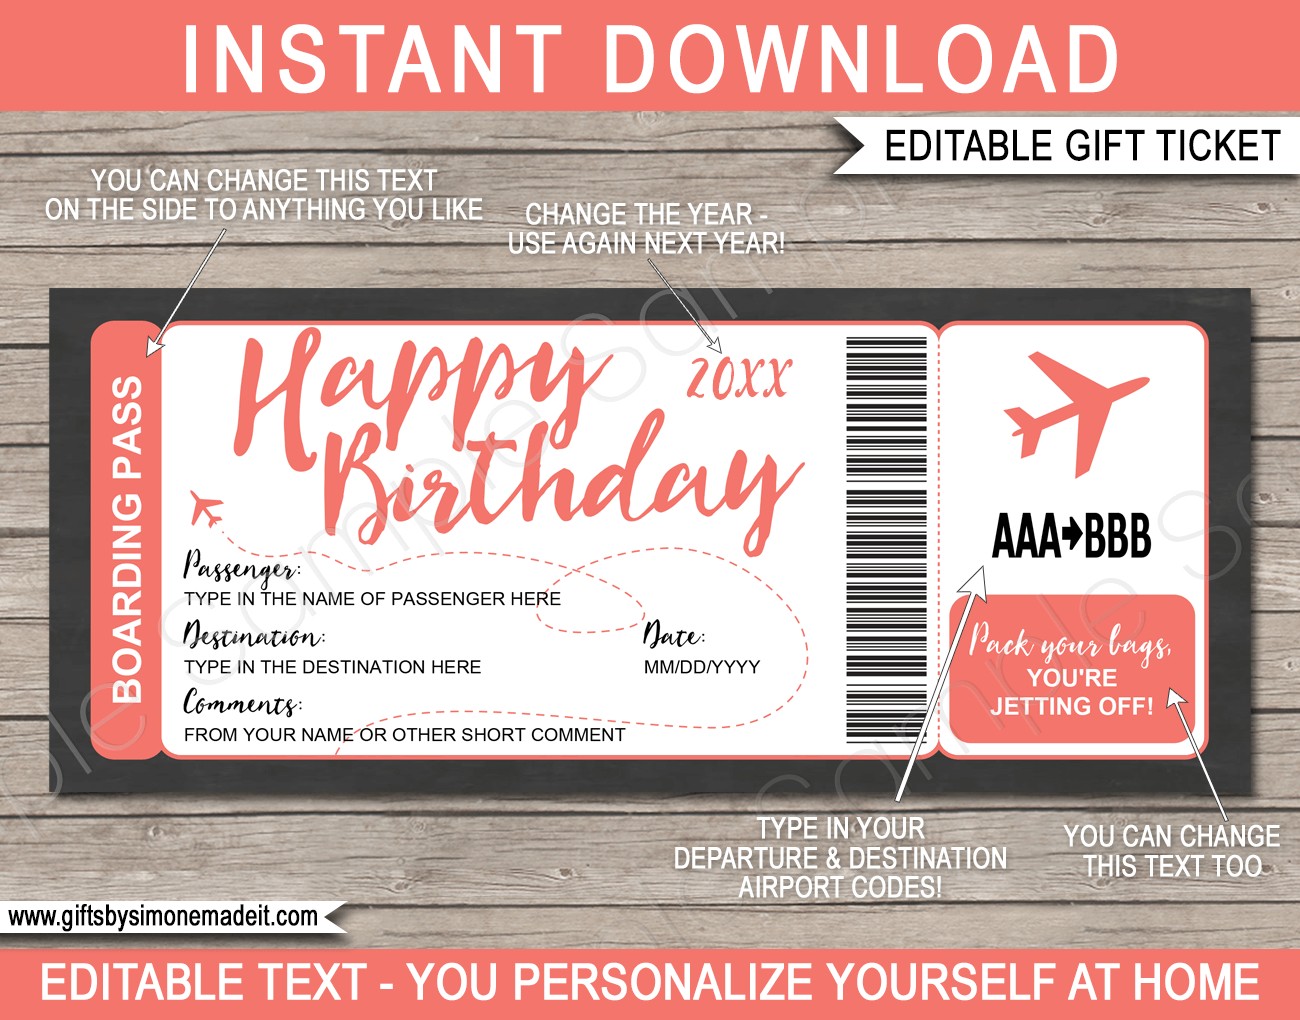 Printable Coral Birthday Surprise Trip Boarding Pass Template | Fake Plane Ticket Gift | Surprise Birthday Trip Reveal | Flight, Holiday, Getaway, Vacation | INSTANT DOWNLOAD via giftsbysimonemadeit.com